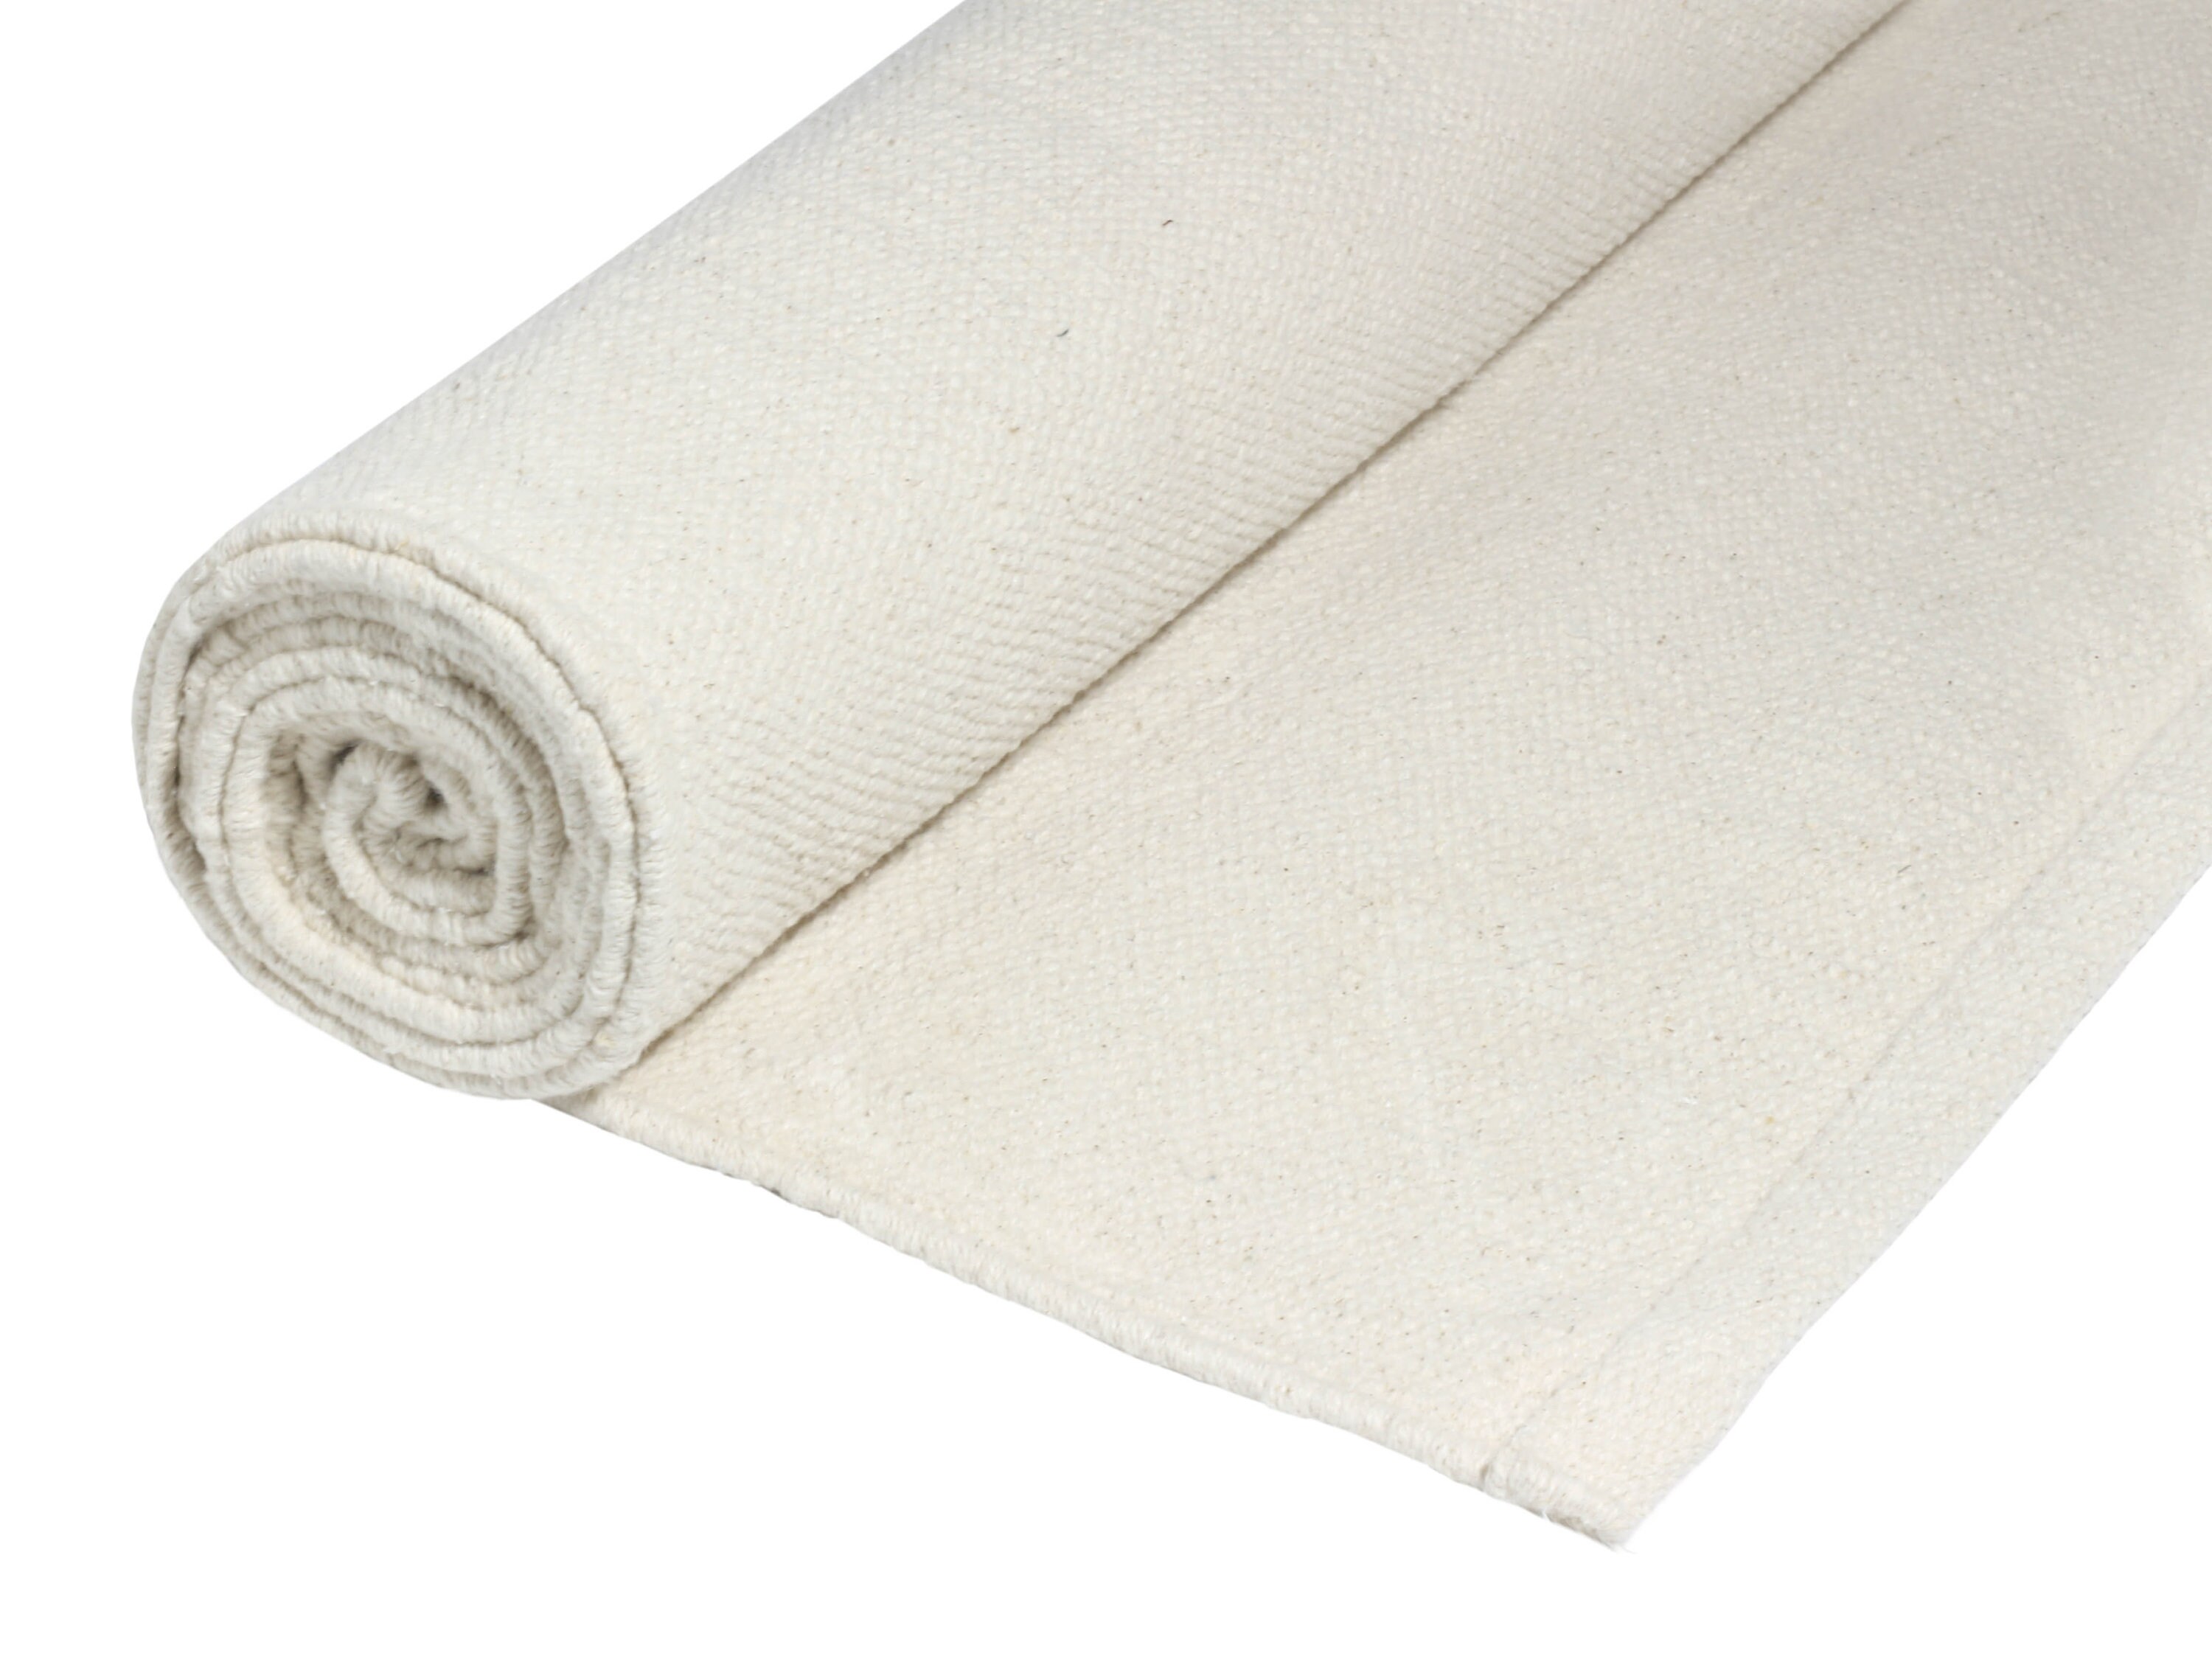 Organic Cotton Yoga Mat - Made only with 100% Organic Cotton!